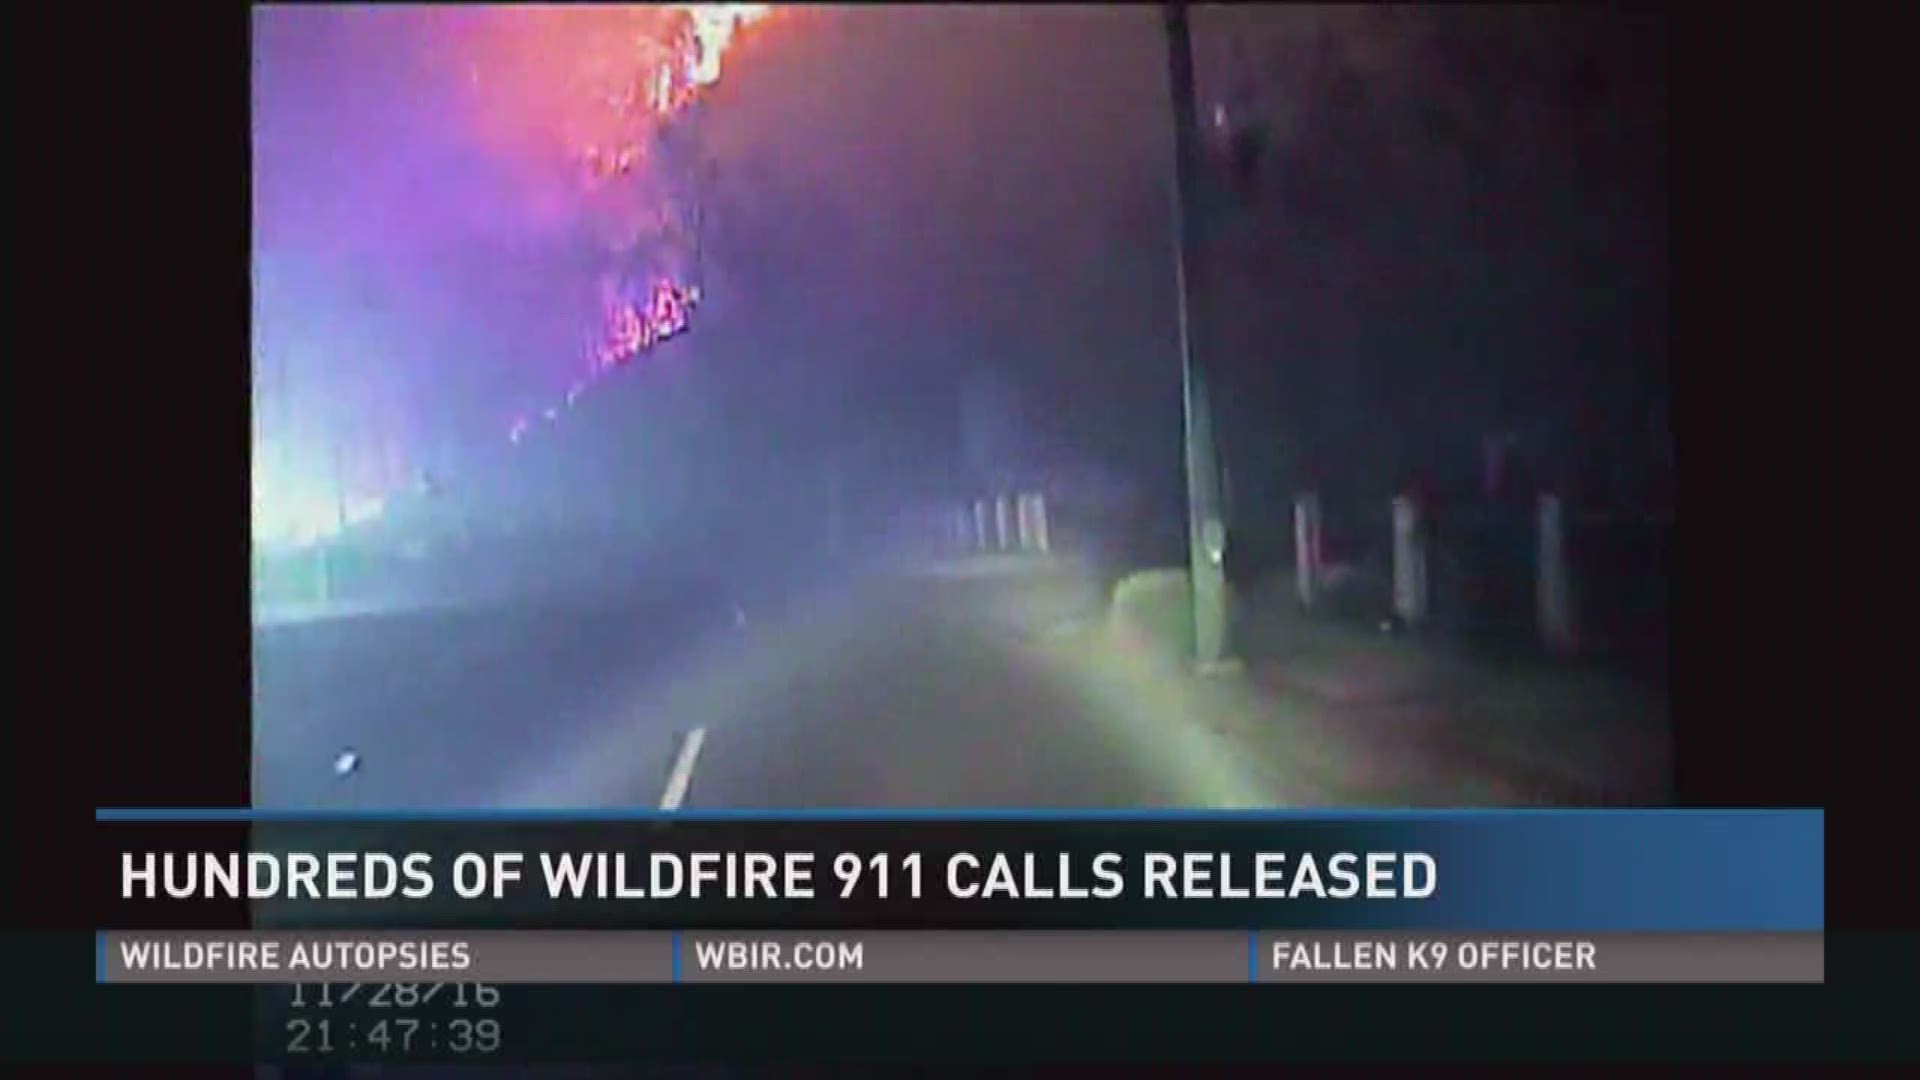 Aug, 9, 2017: Newly released 911 calls, videos and records from Gatlinburg and Sevier County officials detail the night of the deadly November wildfires.